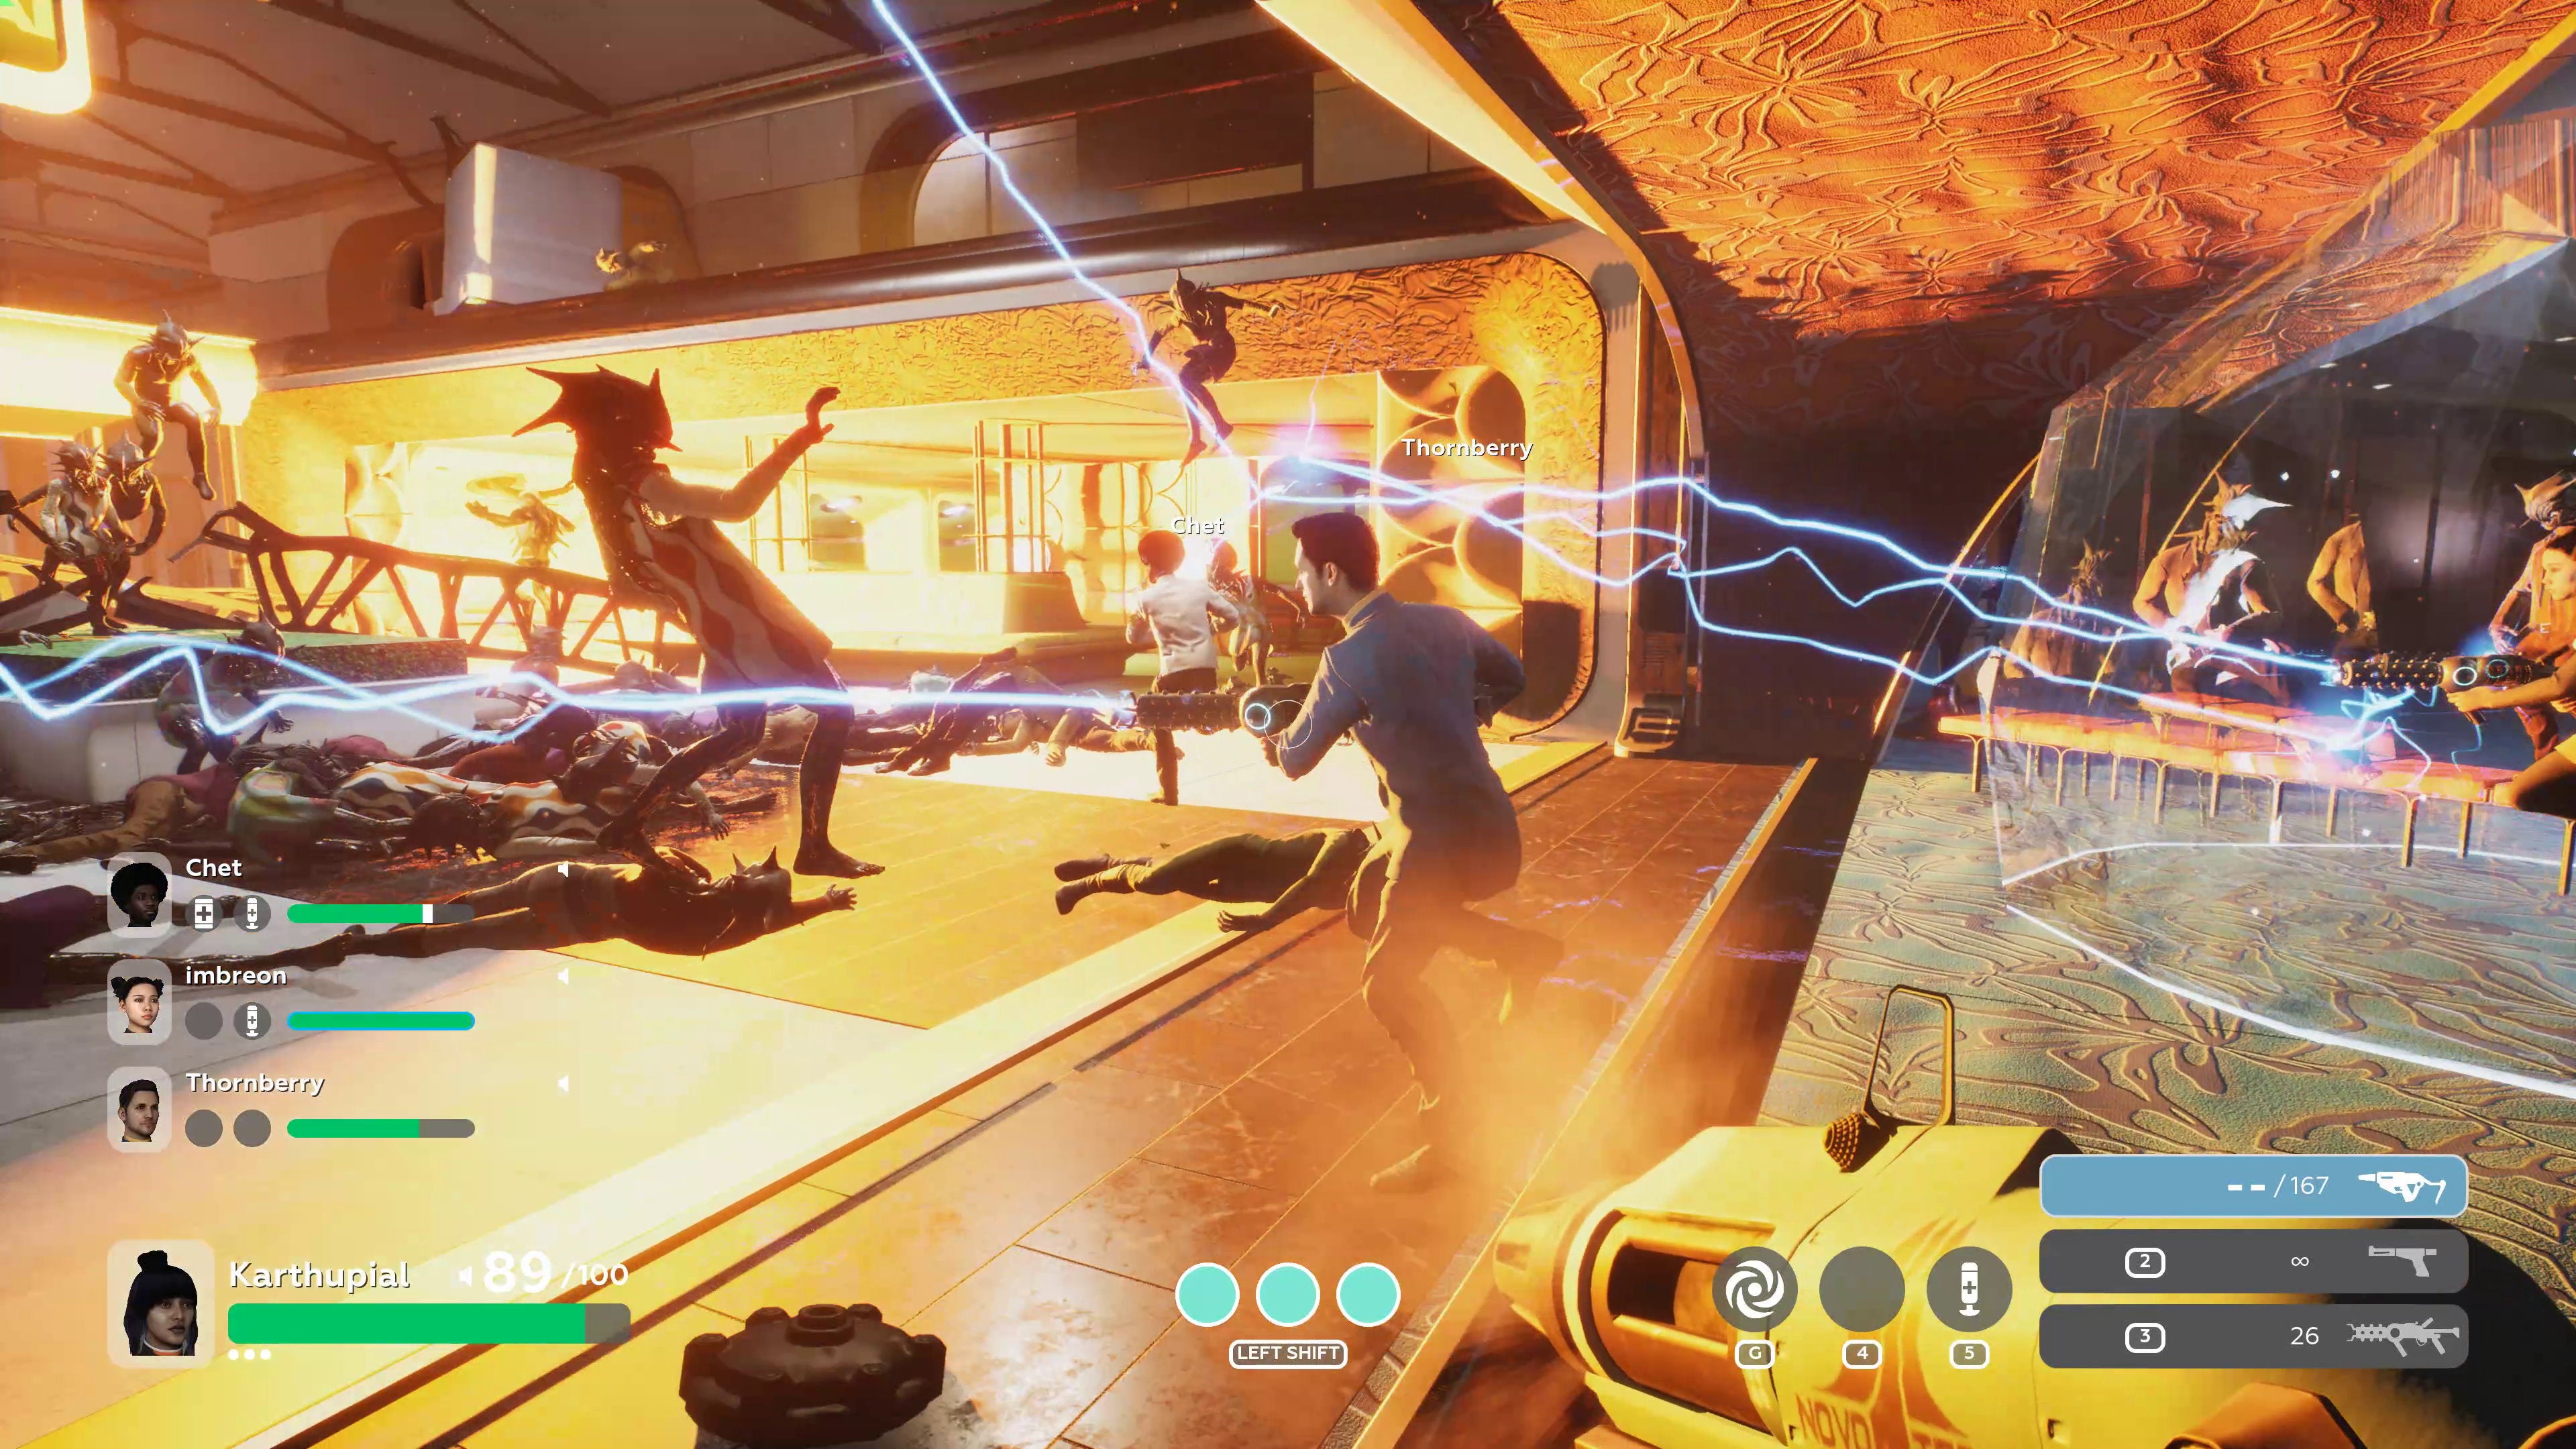 Humans carry a lightning bolt gun against a horde of aliens in The Anacrusis